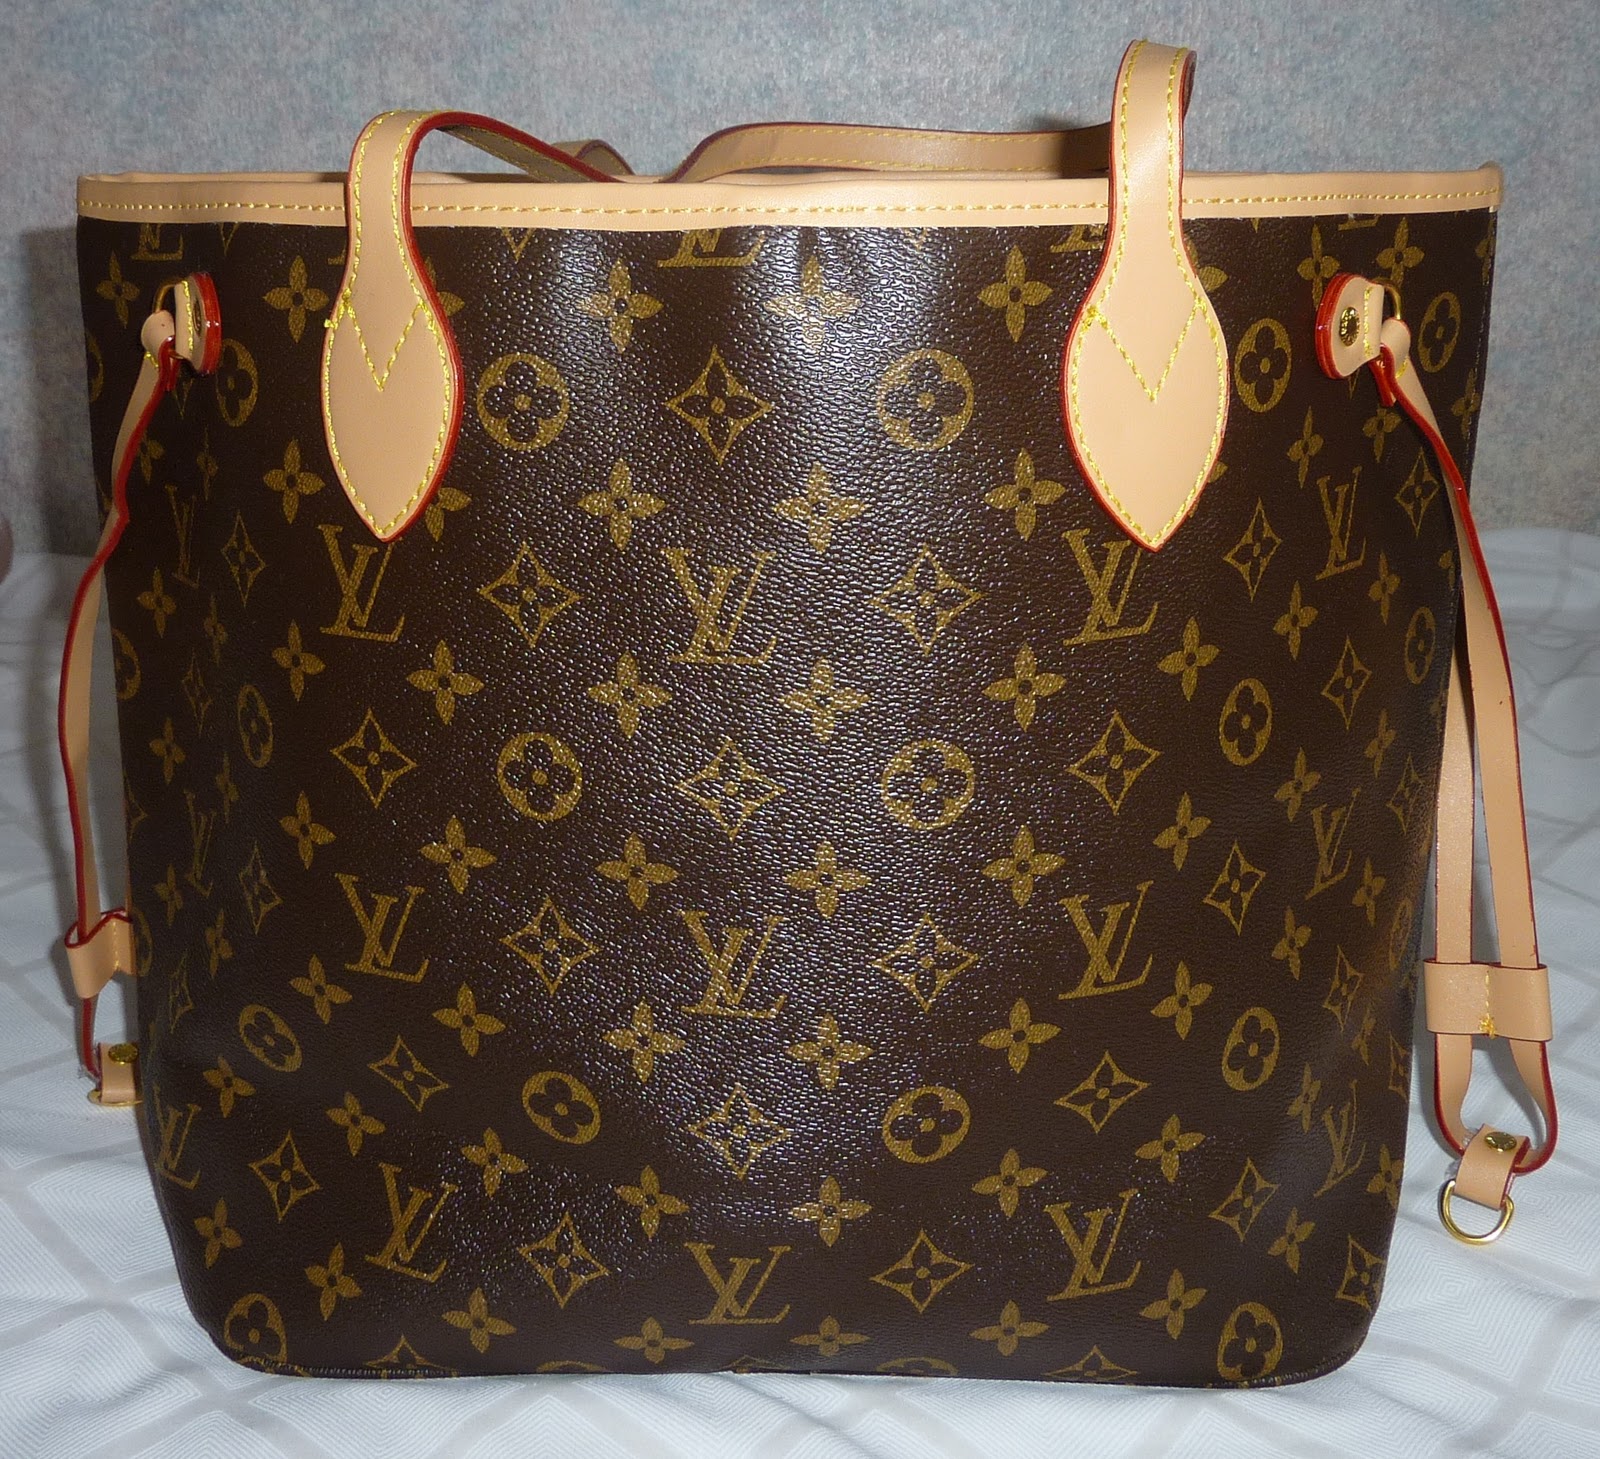 Fake Louis Vuitton Purse For Kids | Jaguar Clubs of North America